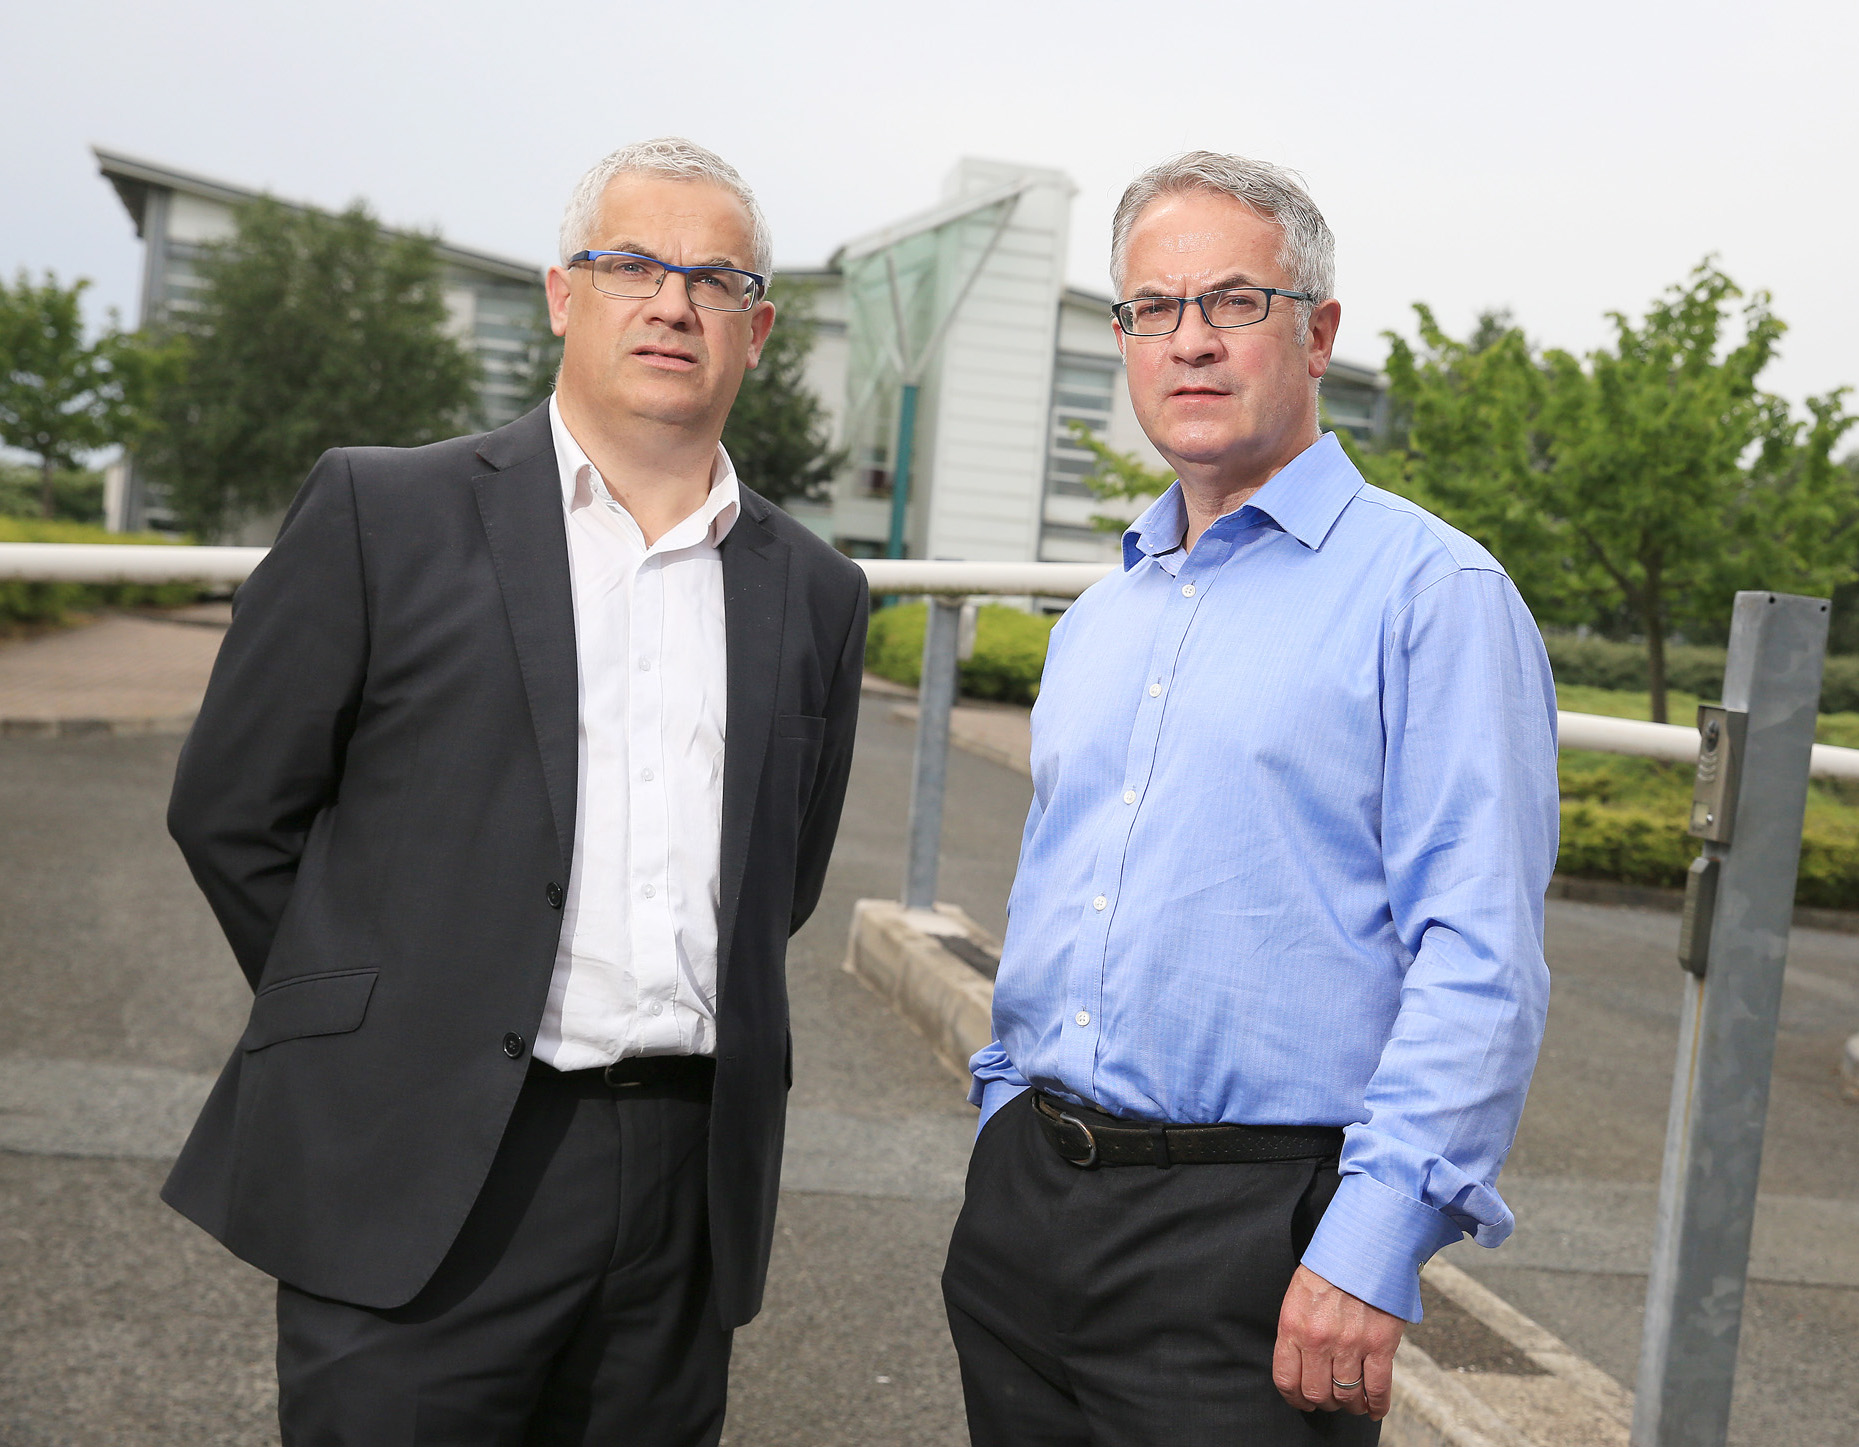 Brothers Tim (left) and Alex Attwood have thrown their weight behind Colum Eastwood in his bid for the SDLP leadership